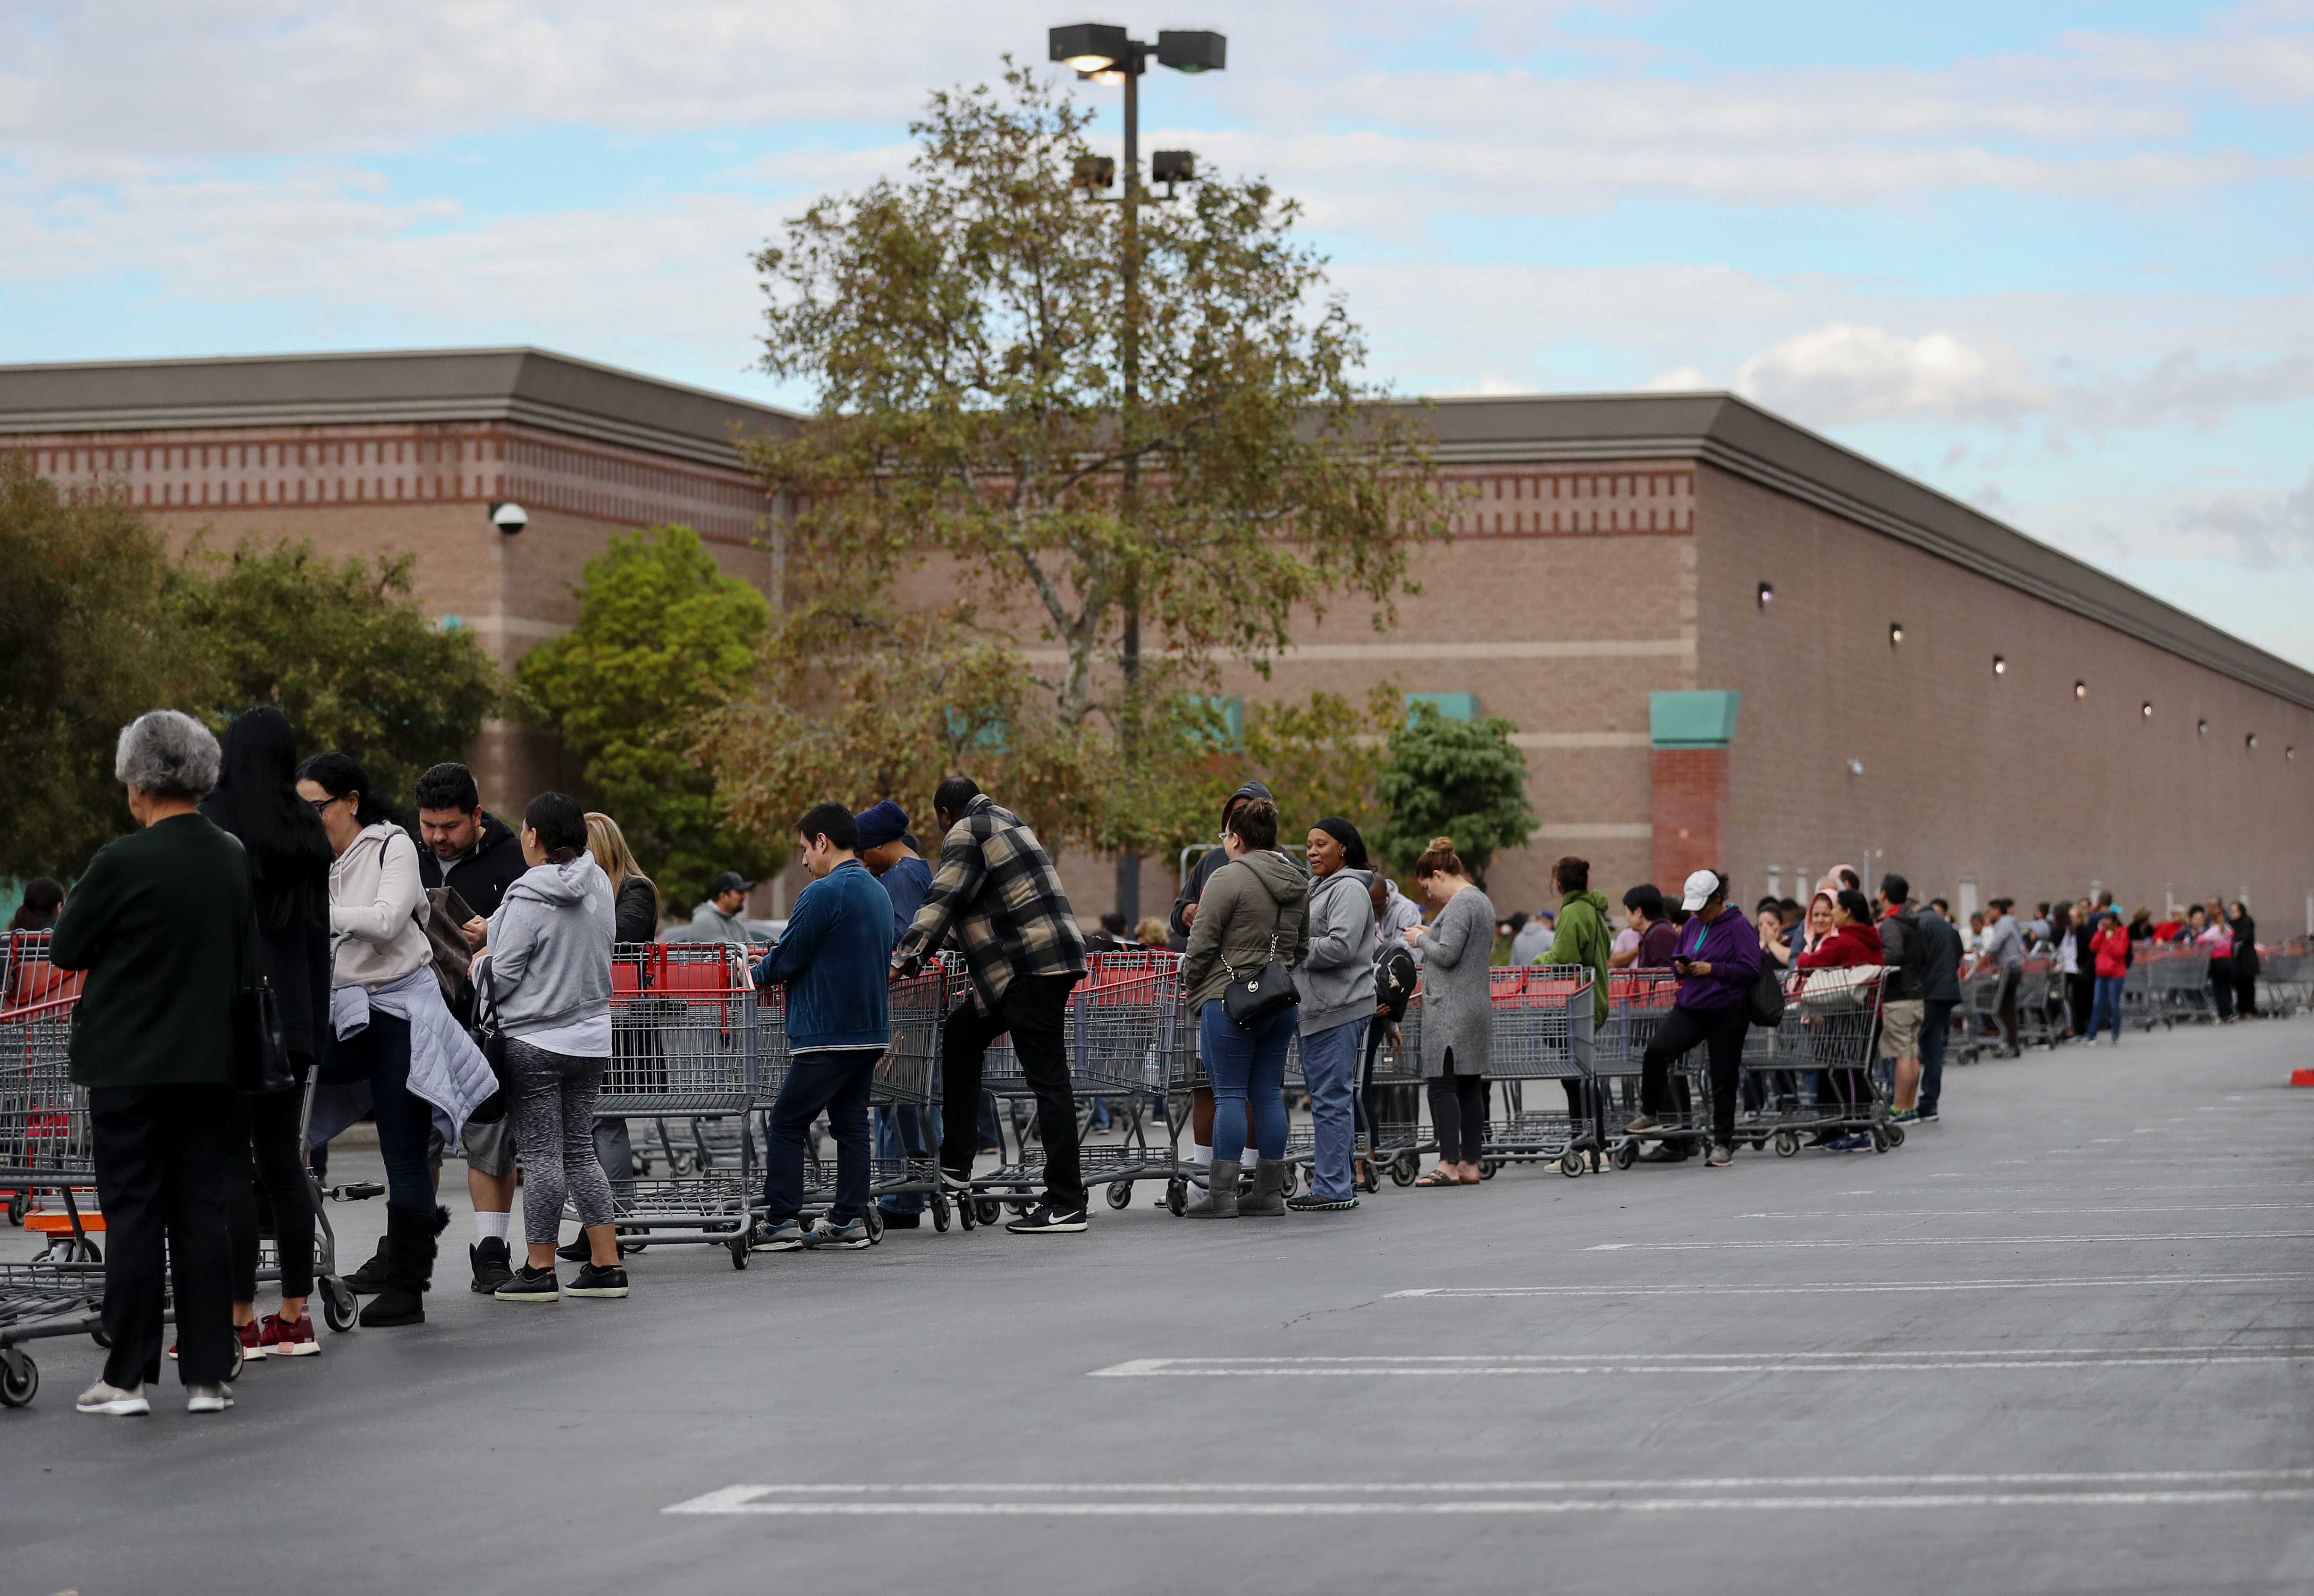 People wait in line to enter a Costco Wholesale store before it opened in the morning on March 12, 2020 in Glendale, California. (Mario Tama/Getty Images)